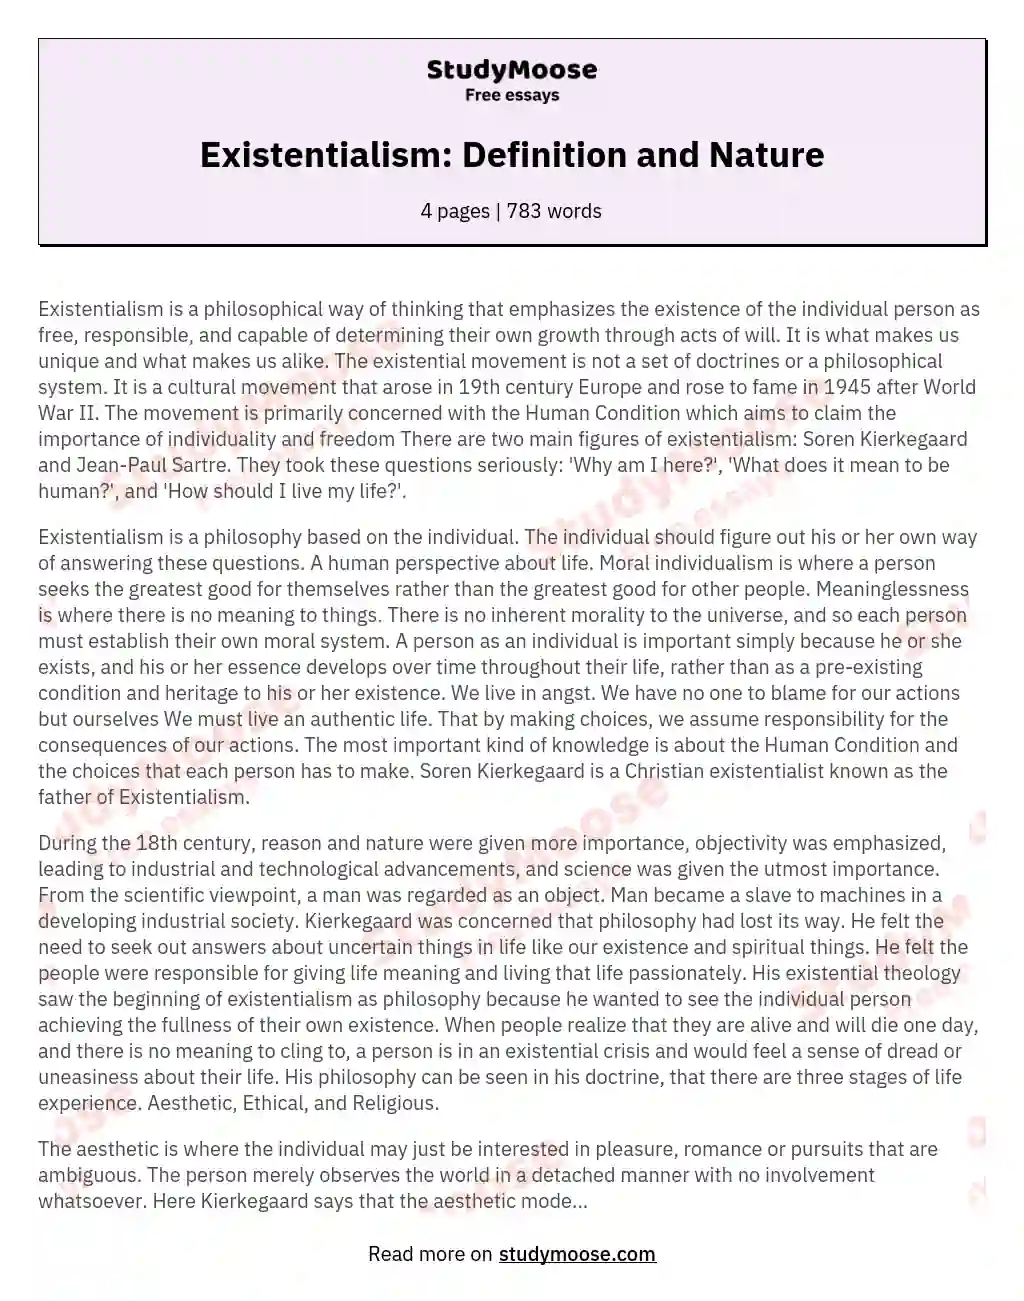 Existentialism: Definition and Nature